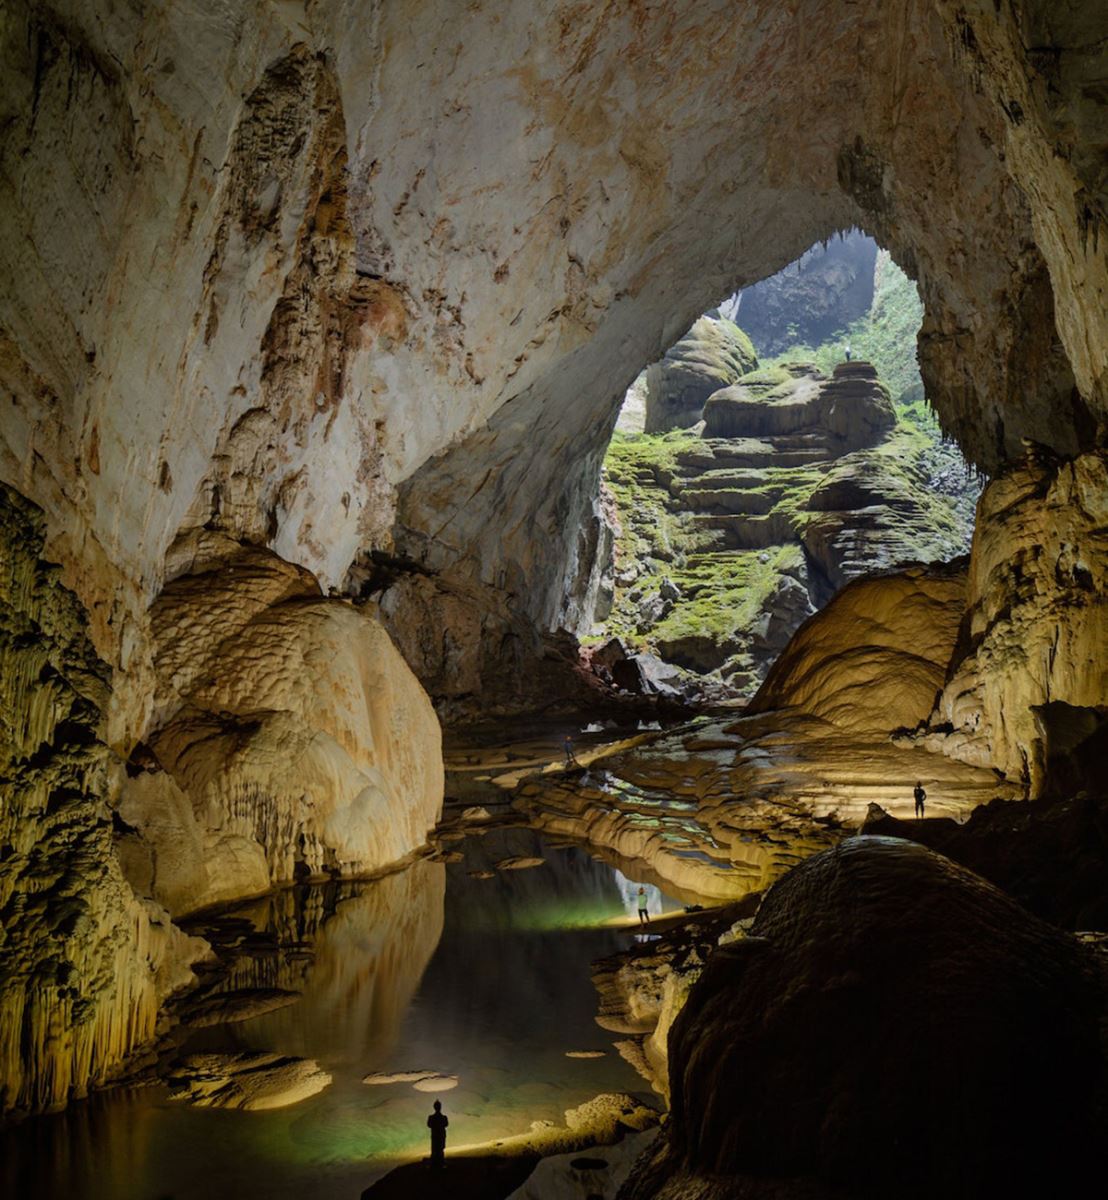 How to explore the world's largest cave, Hang Son Doong, in Vietnam